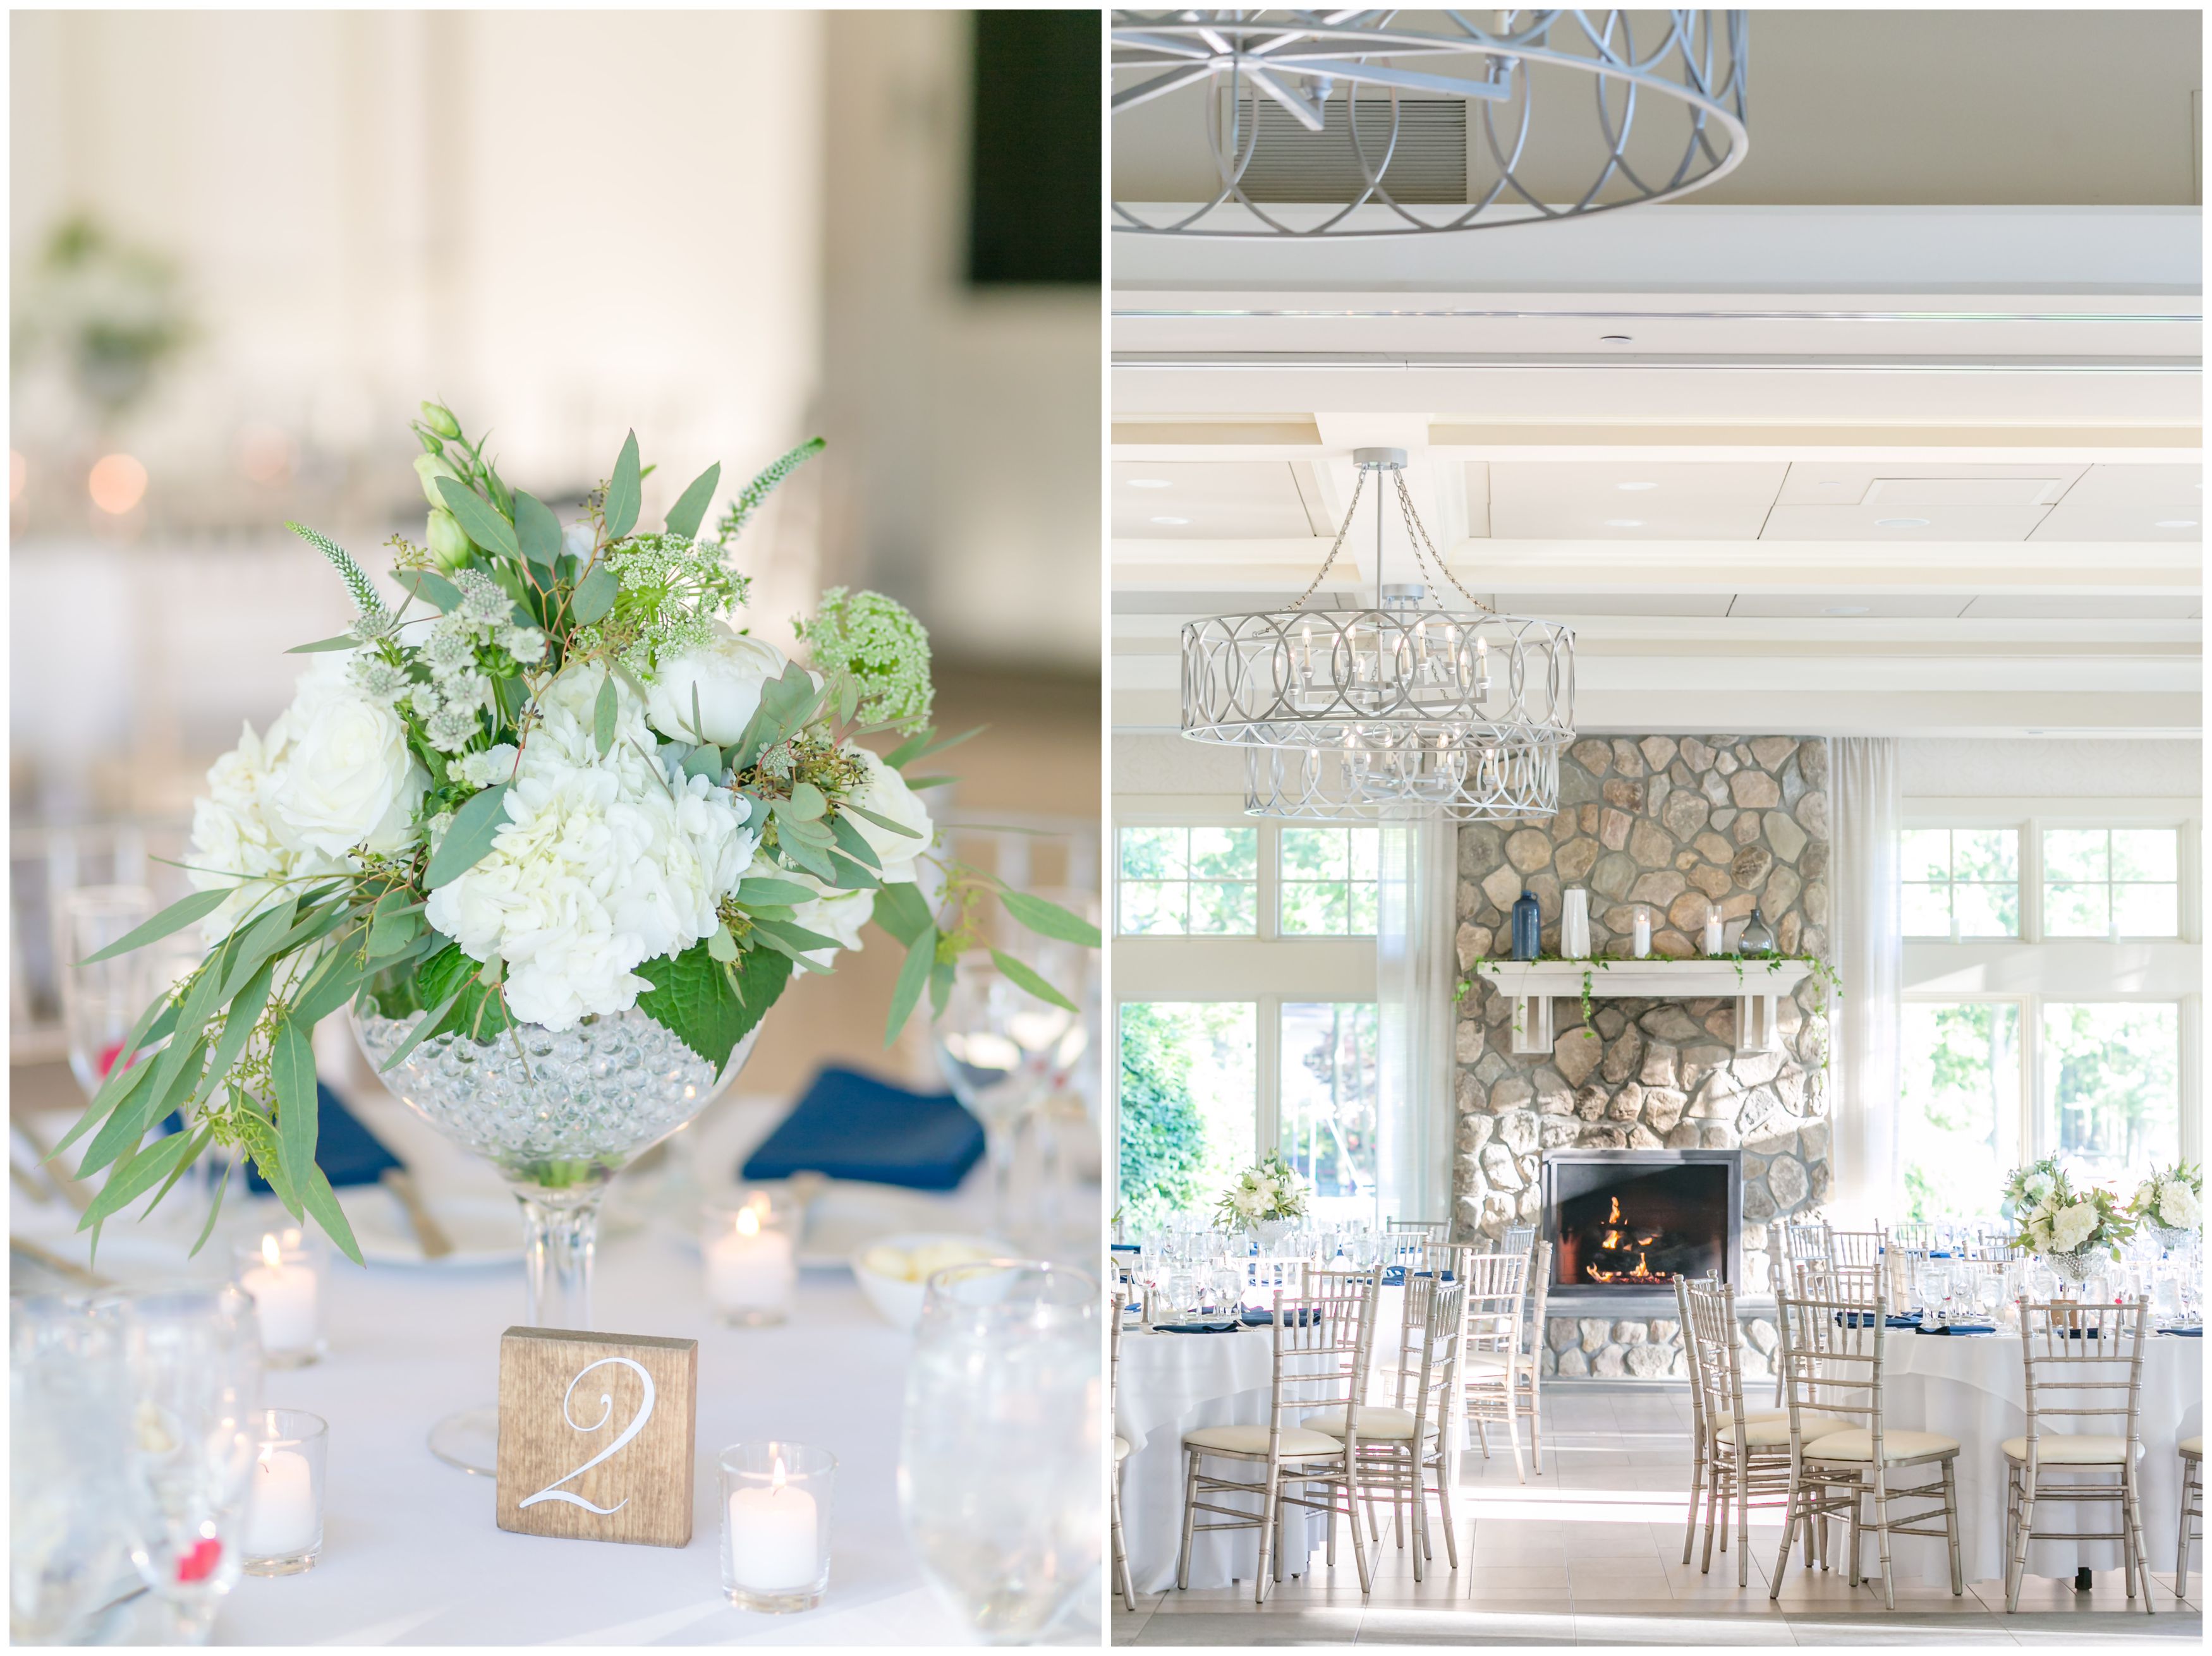 Indian Trail Club reception details for elegant white and navy summer wedding